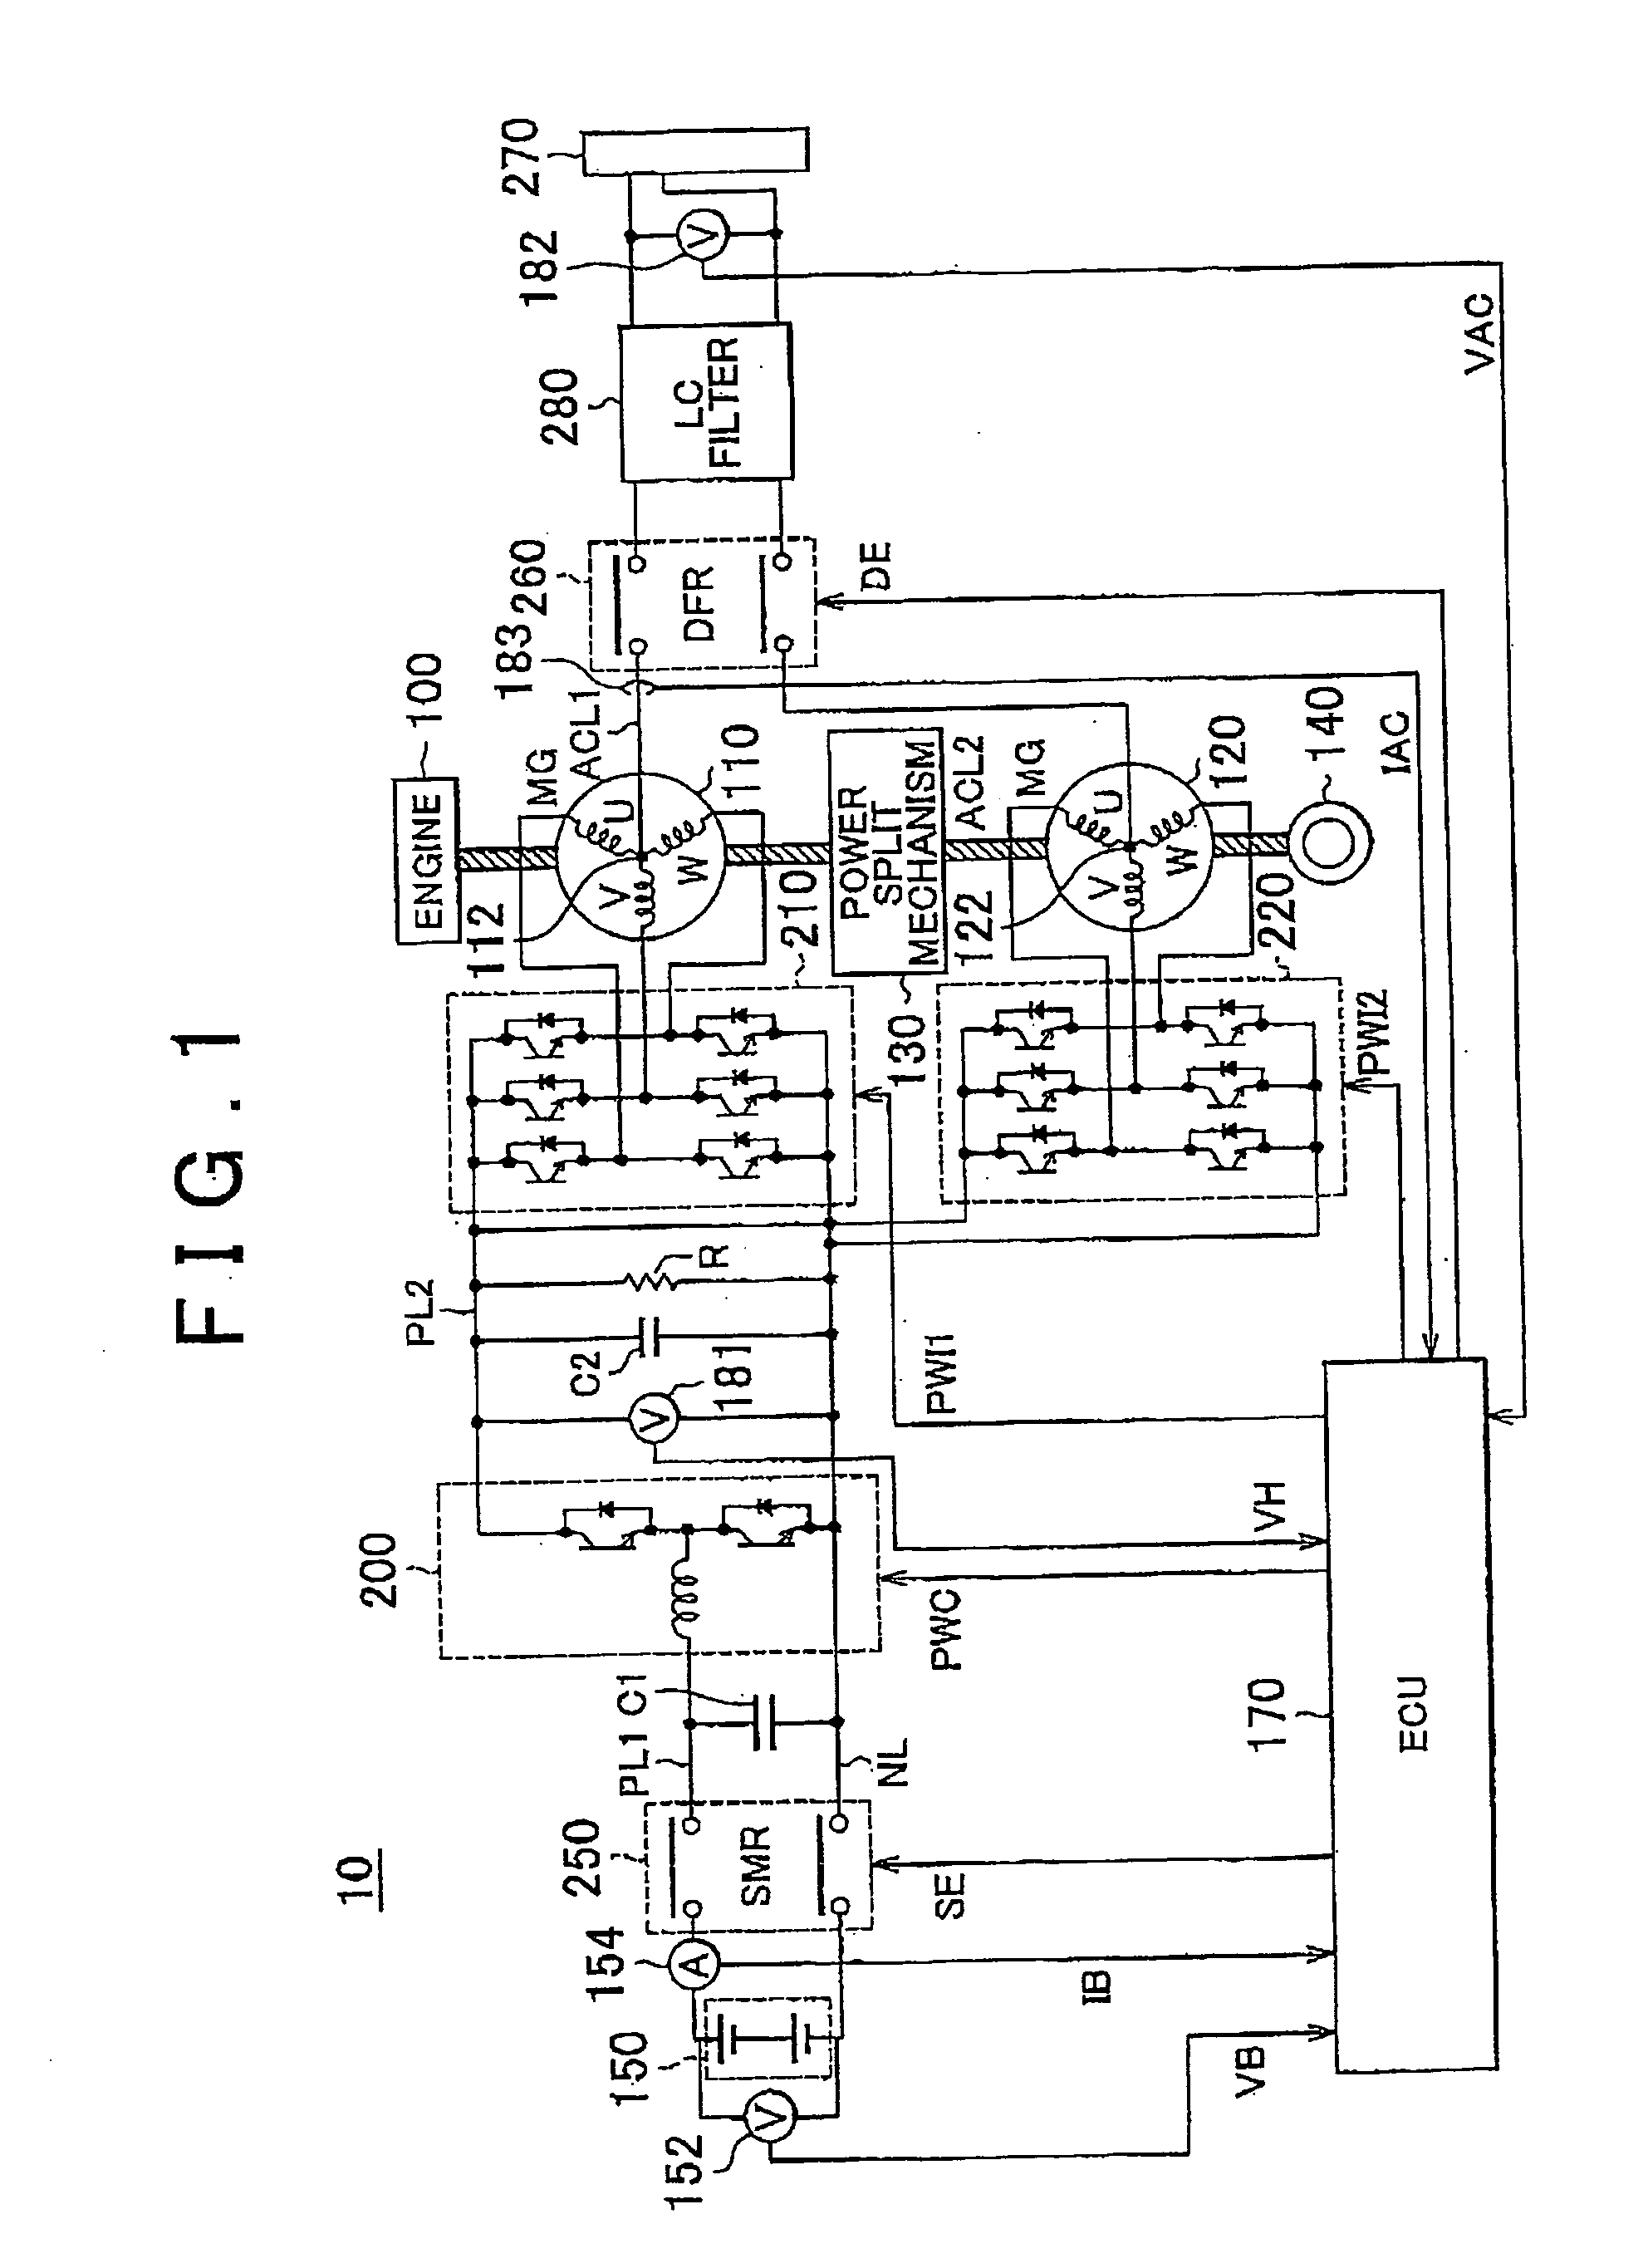 Vehicle equipped with electrical storage device, and charging cable